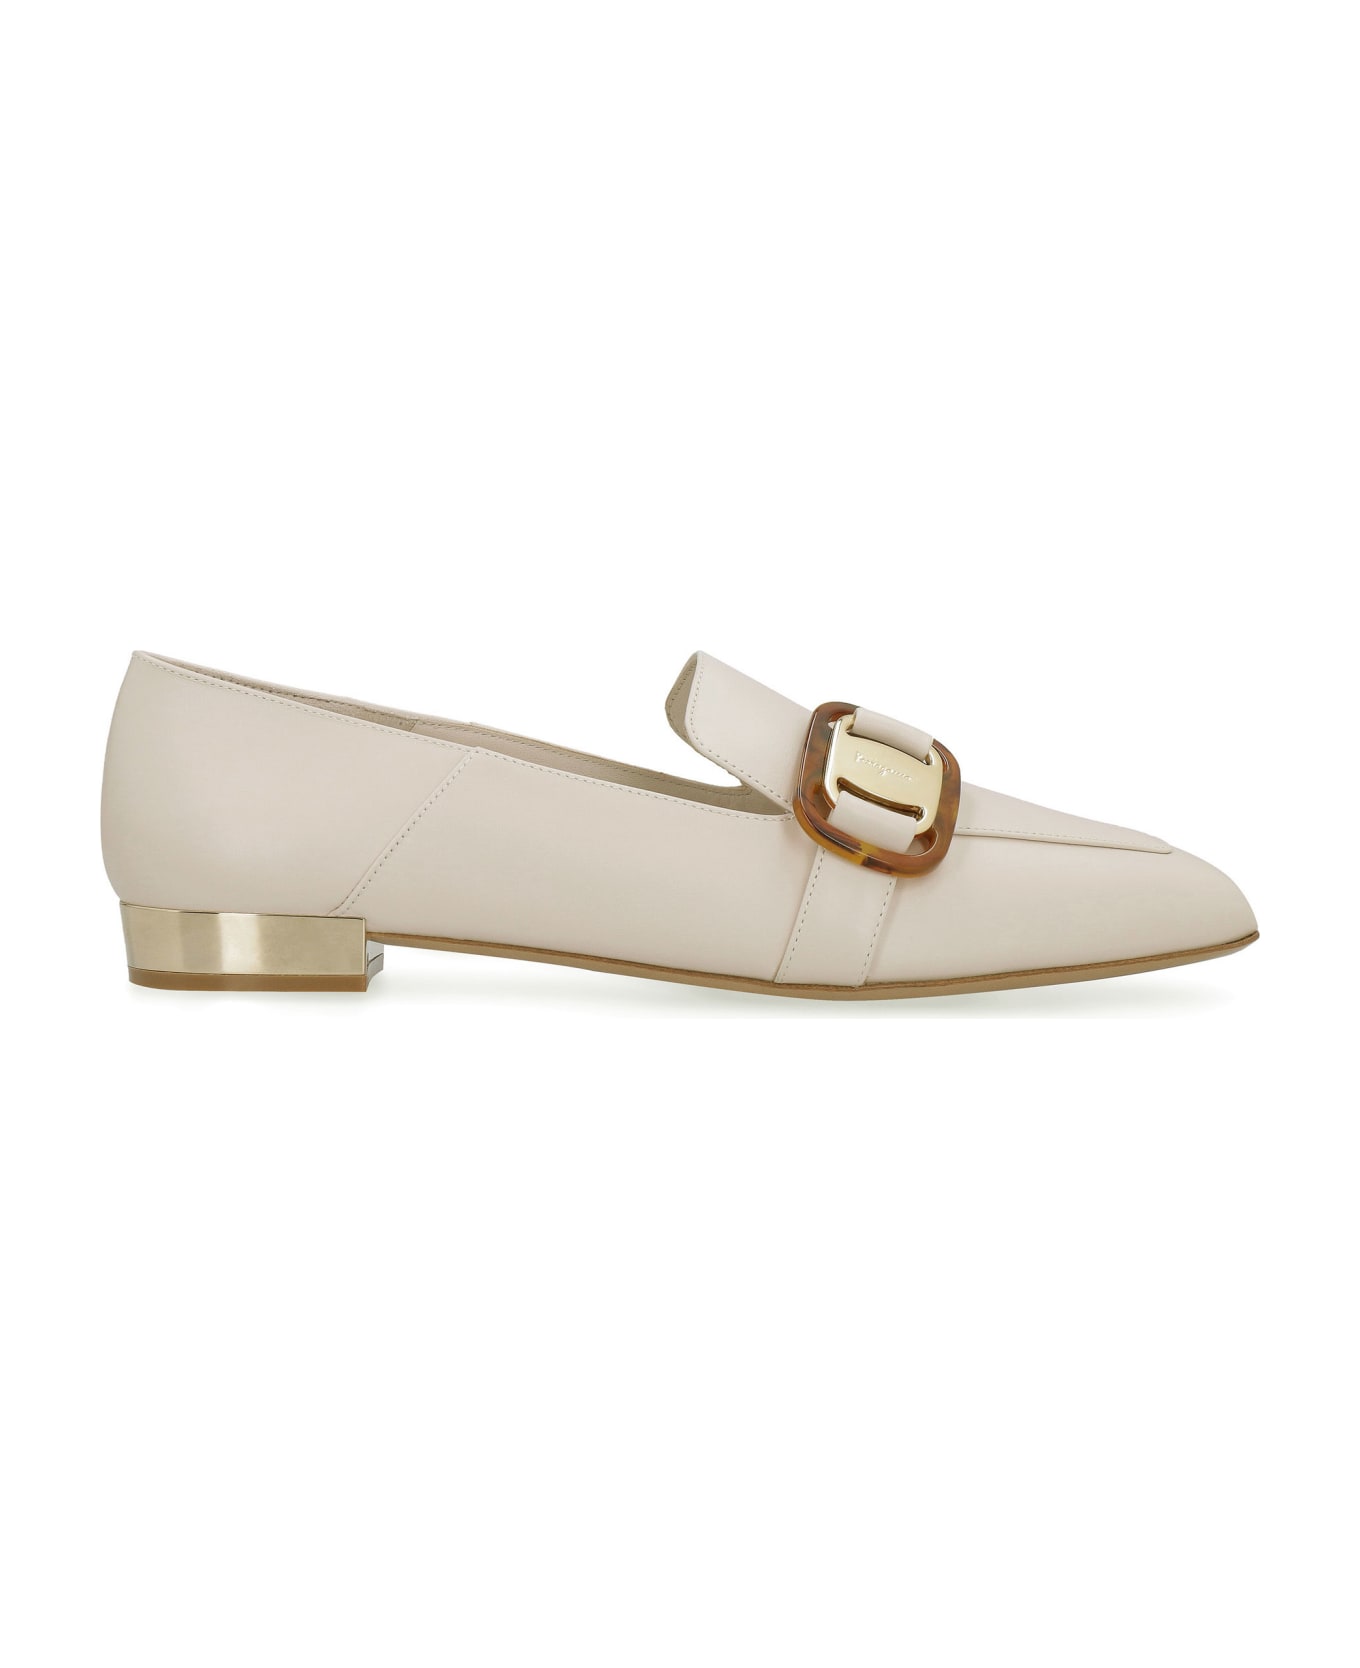 Ferragamo Wang Leather Loafers - Ivory